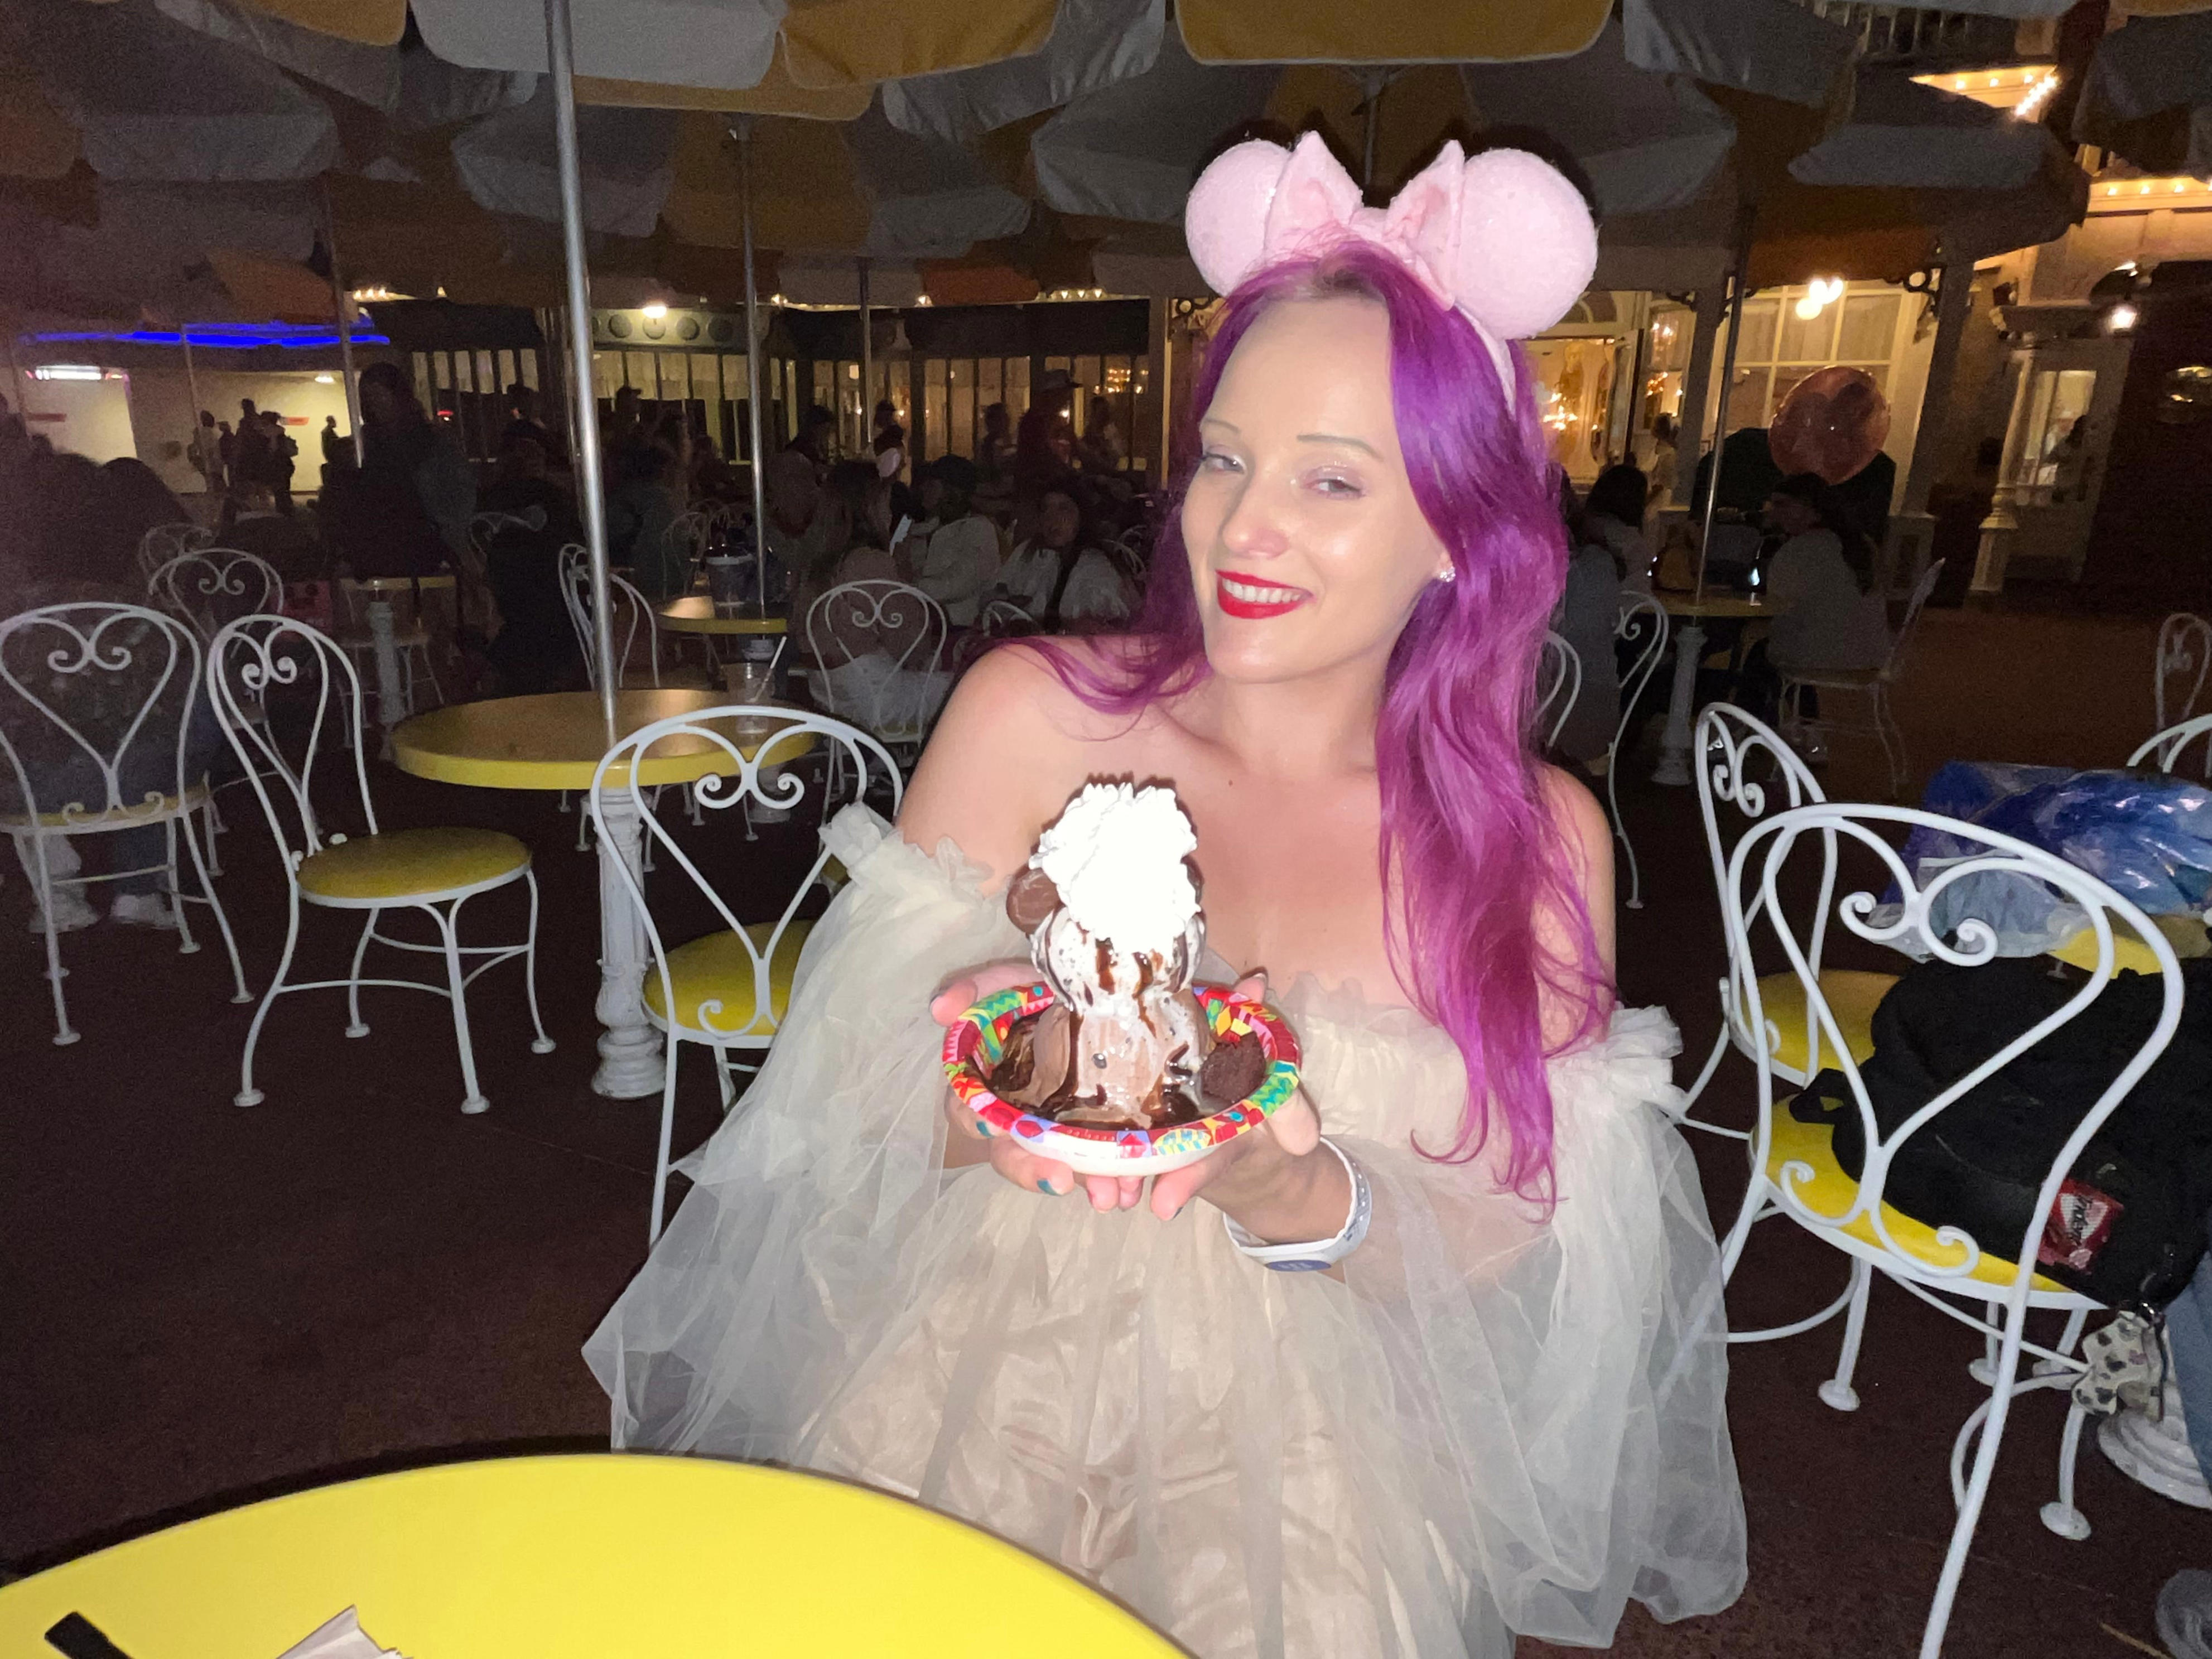 <p>Normally, the extended hours at Magic Kingdom for Disney resort guests are on Wednesdays. But they fell on a Tuesday during my stay, and I wanted to take advantage of the benefit.</p><p>We hit up the <a href="https://www.businessinsider.com/best-ice-cream-disney-world-2018-8">ice-cream parlor</a> on Main Street for a late-night treat. </p>